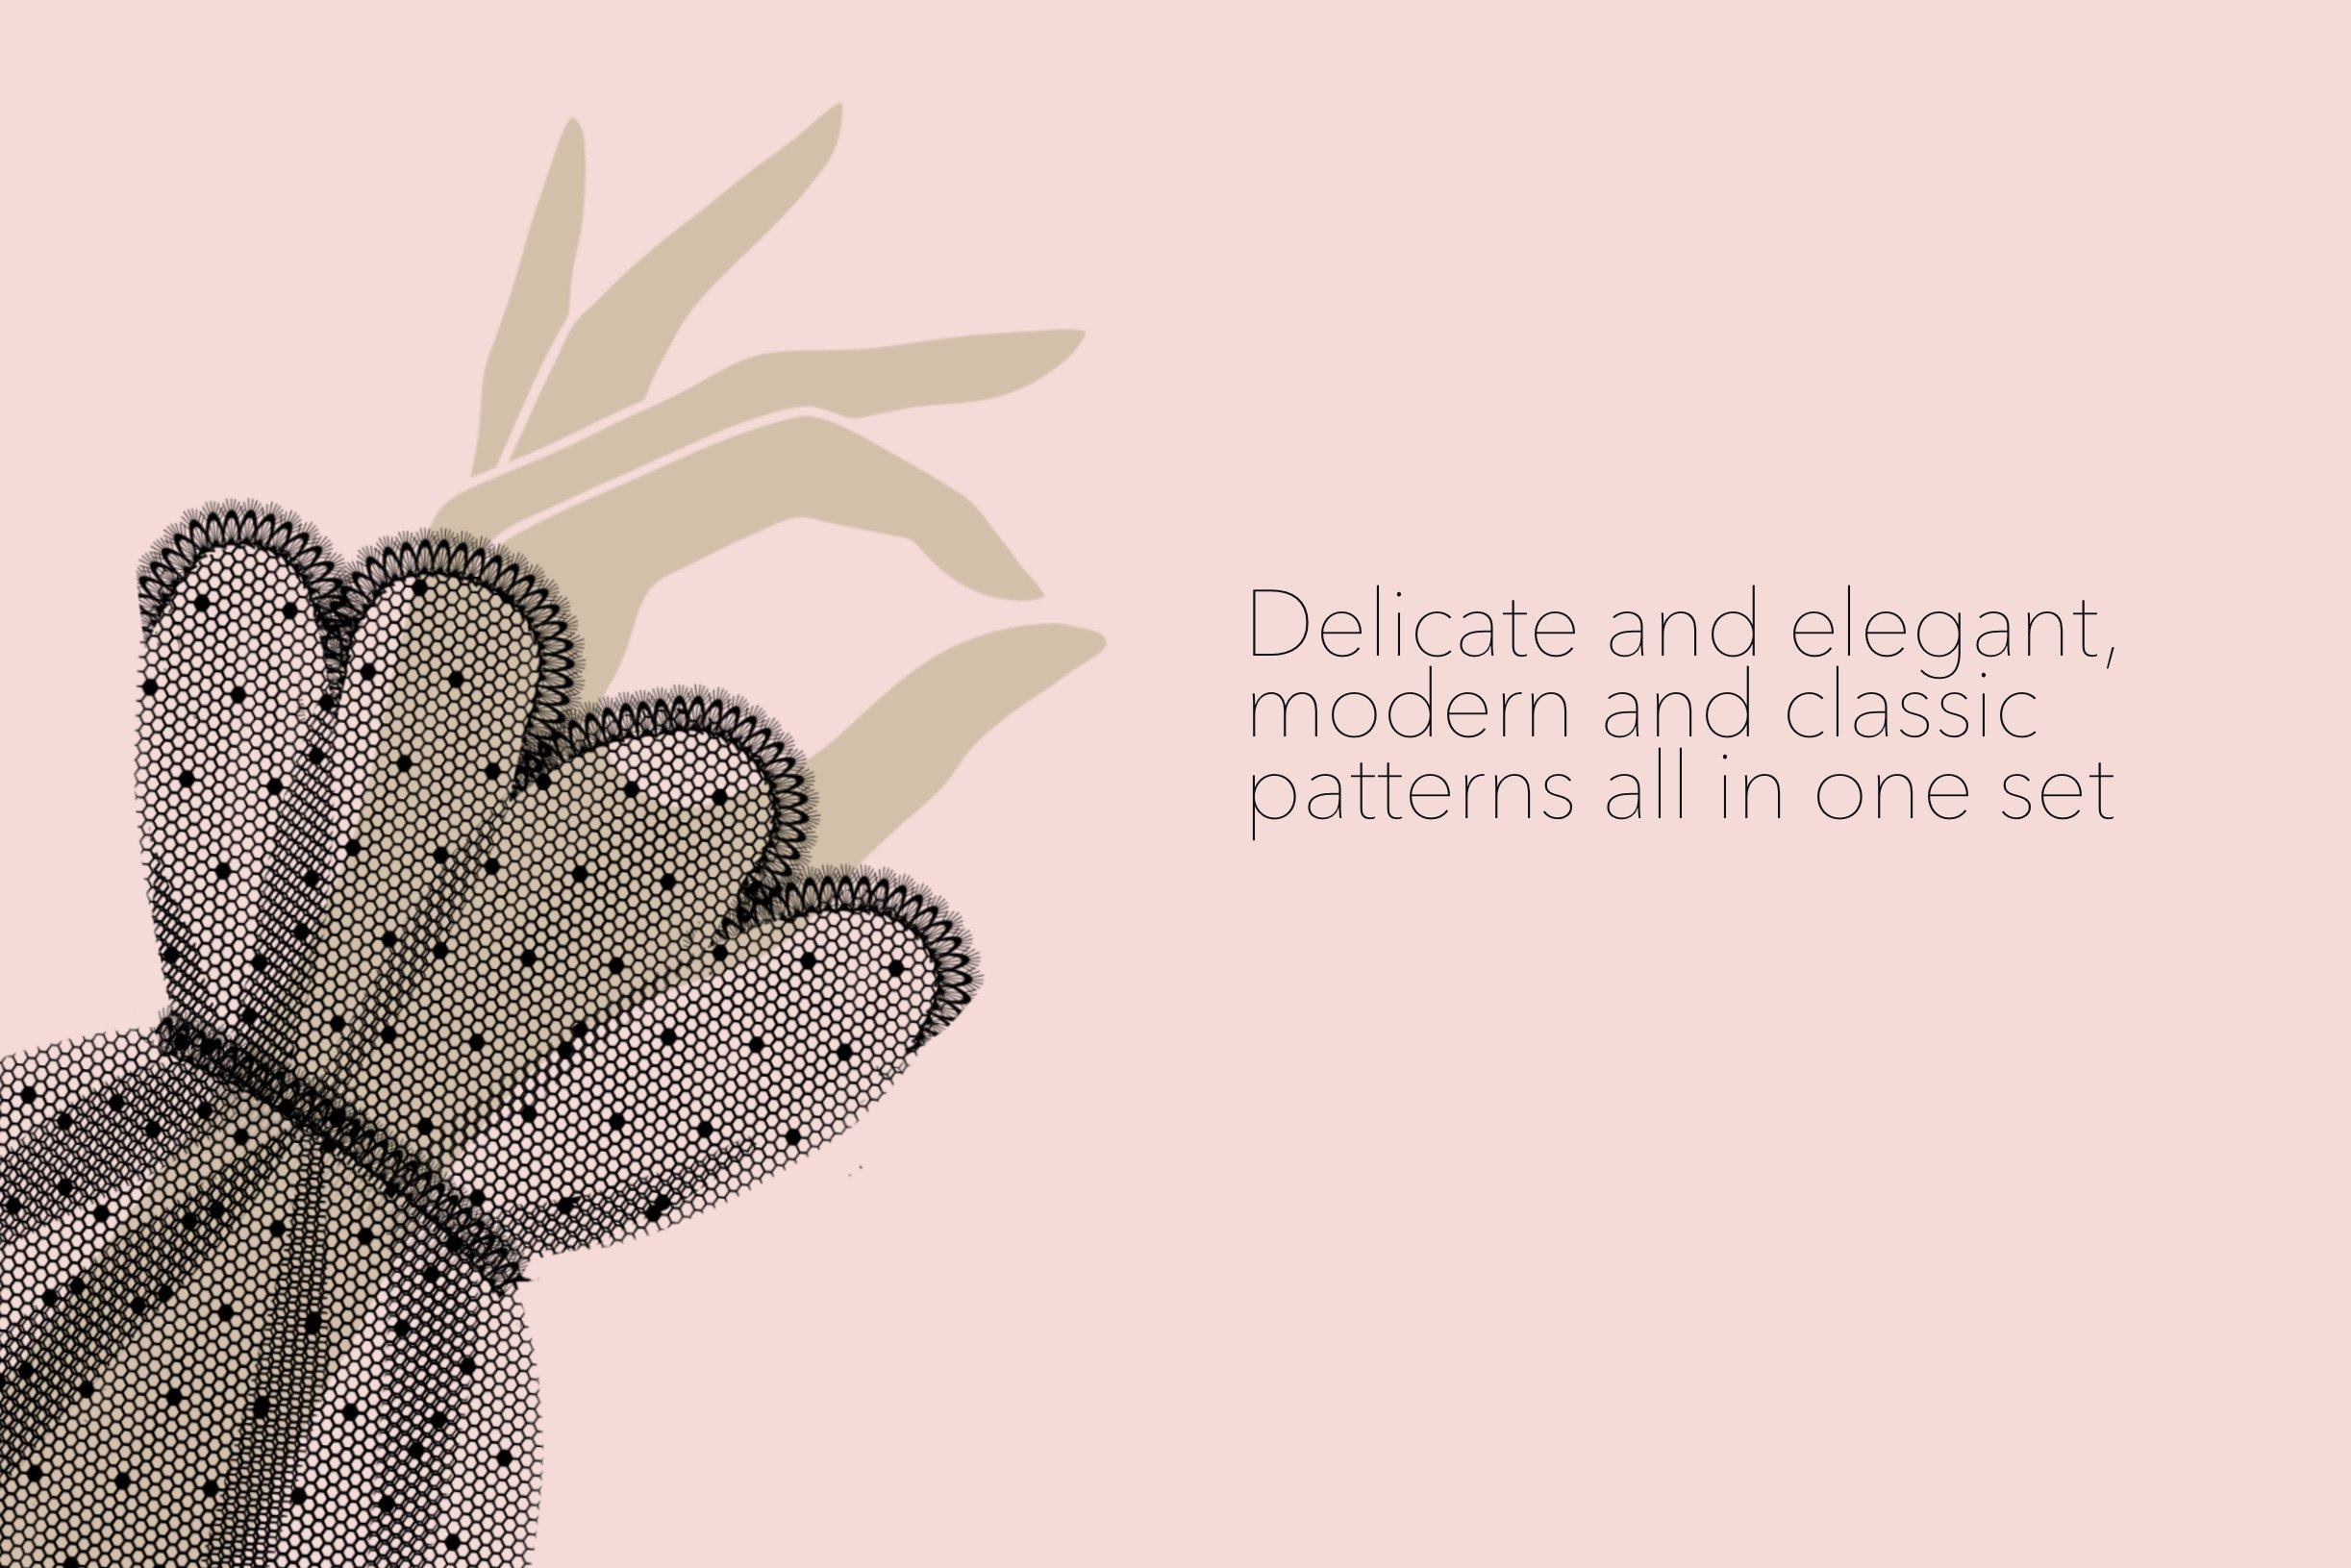 Delicate and elegant, modern and classic patterns all in one set.